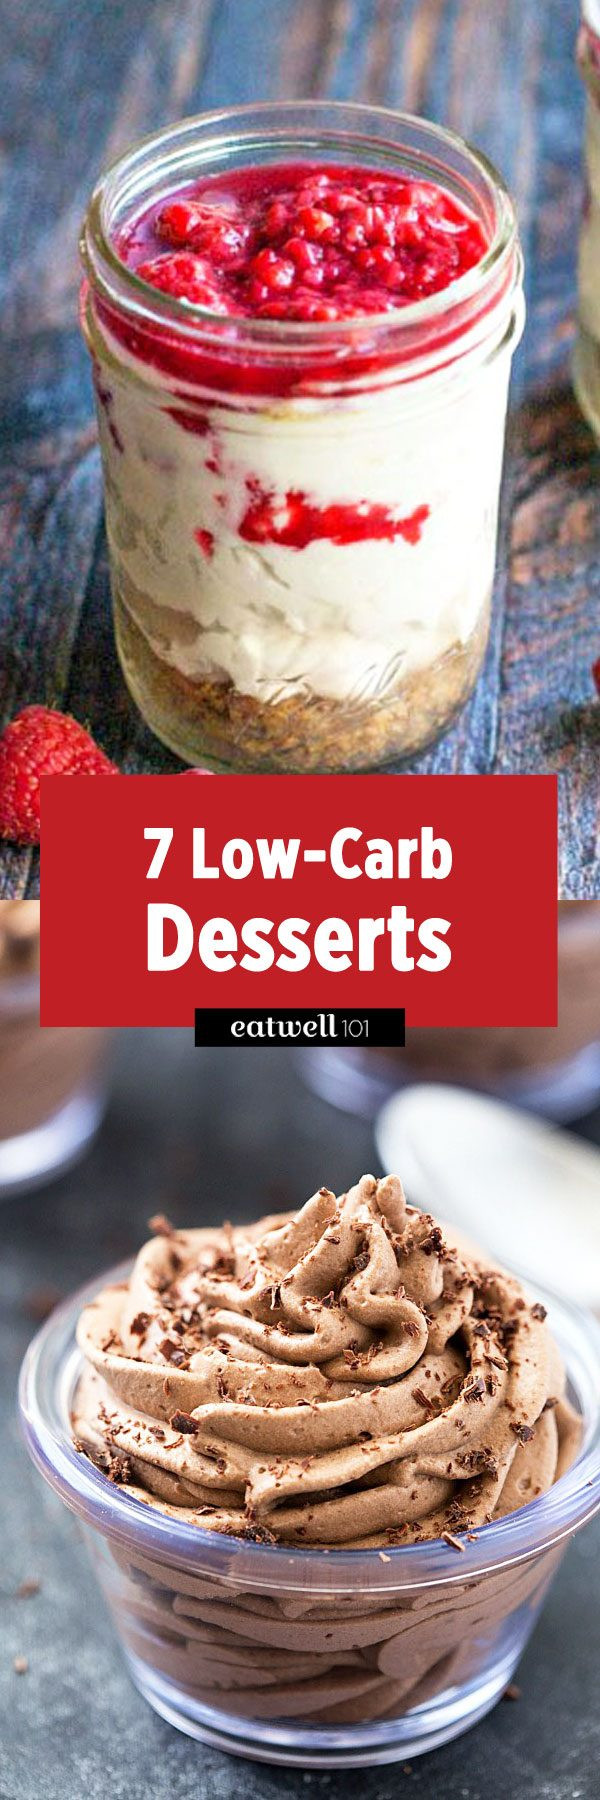 Low Carb Desserts
 Your Christmas Dessert Needs These Low Carb Treats